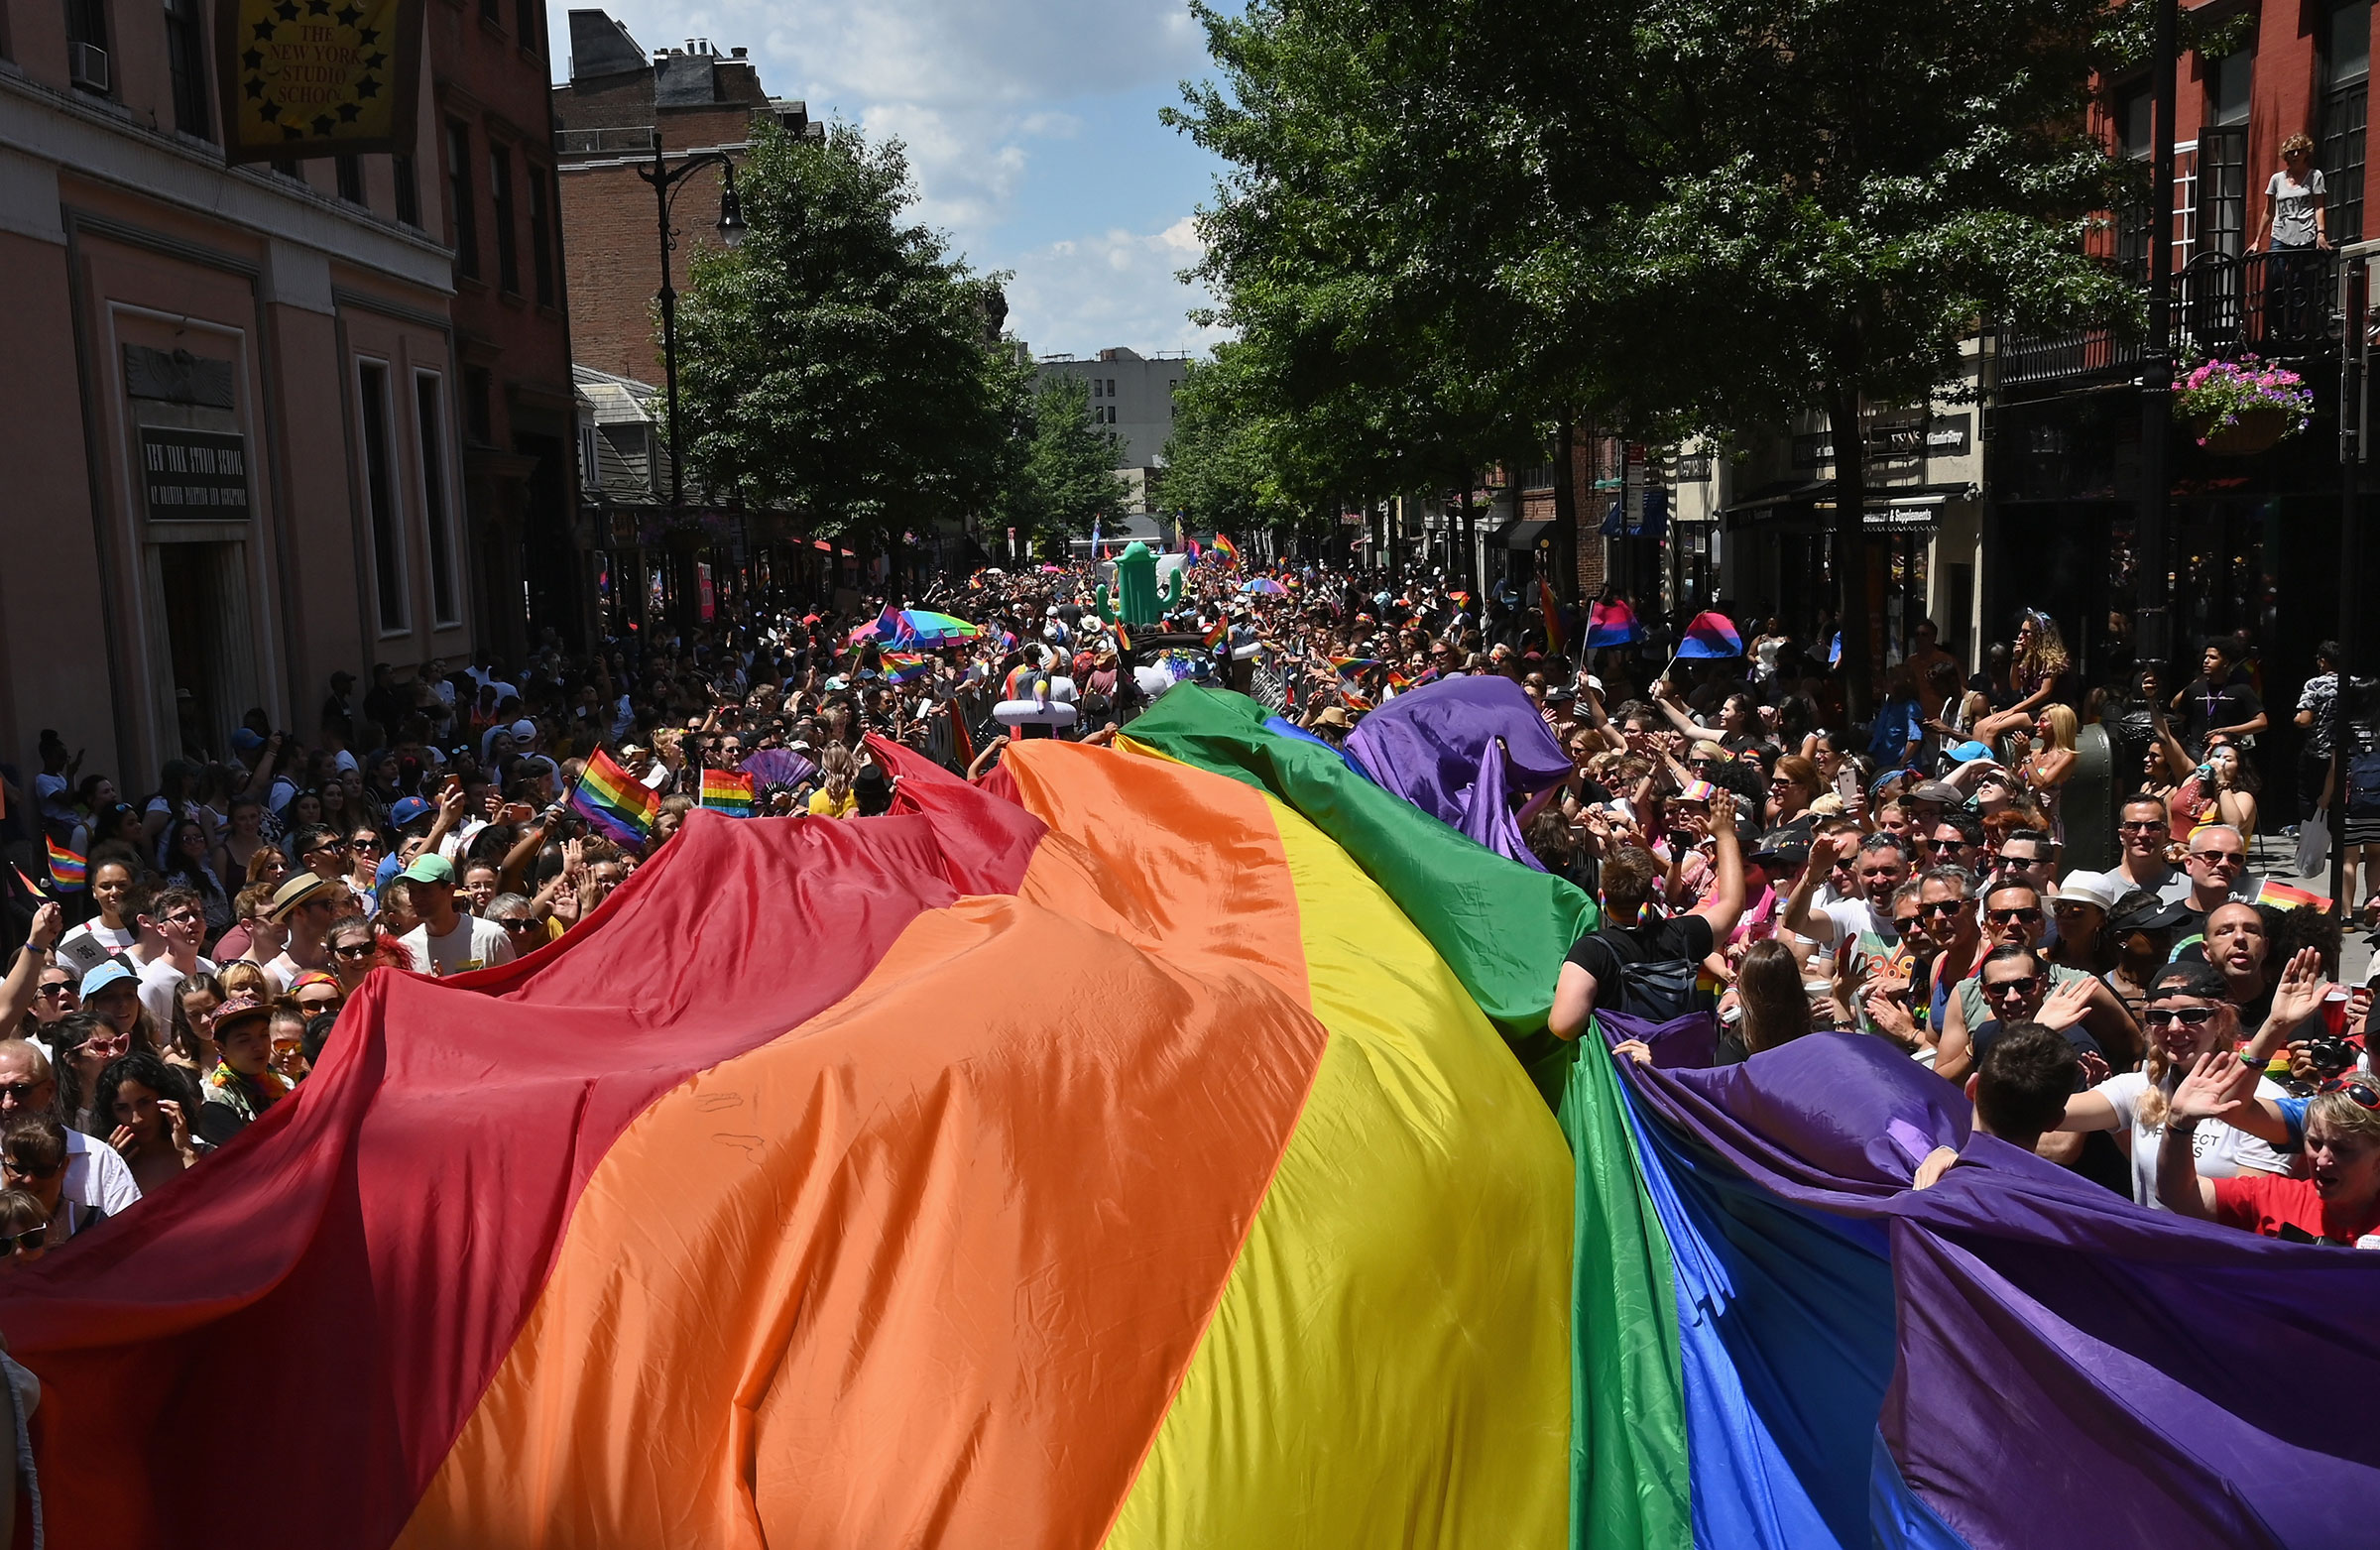 Participants take part in the NYC Pride March as part of World Pride commemorating the 50th Anniversary of the Stonewall Uprising on June 30, 2019 in New York City. (Angela Weiss—AFP/Getty Images)